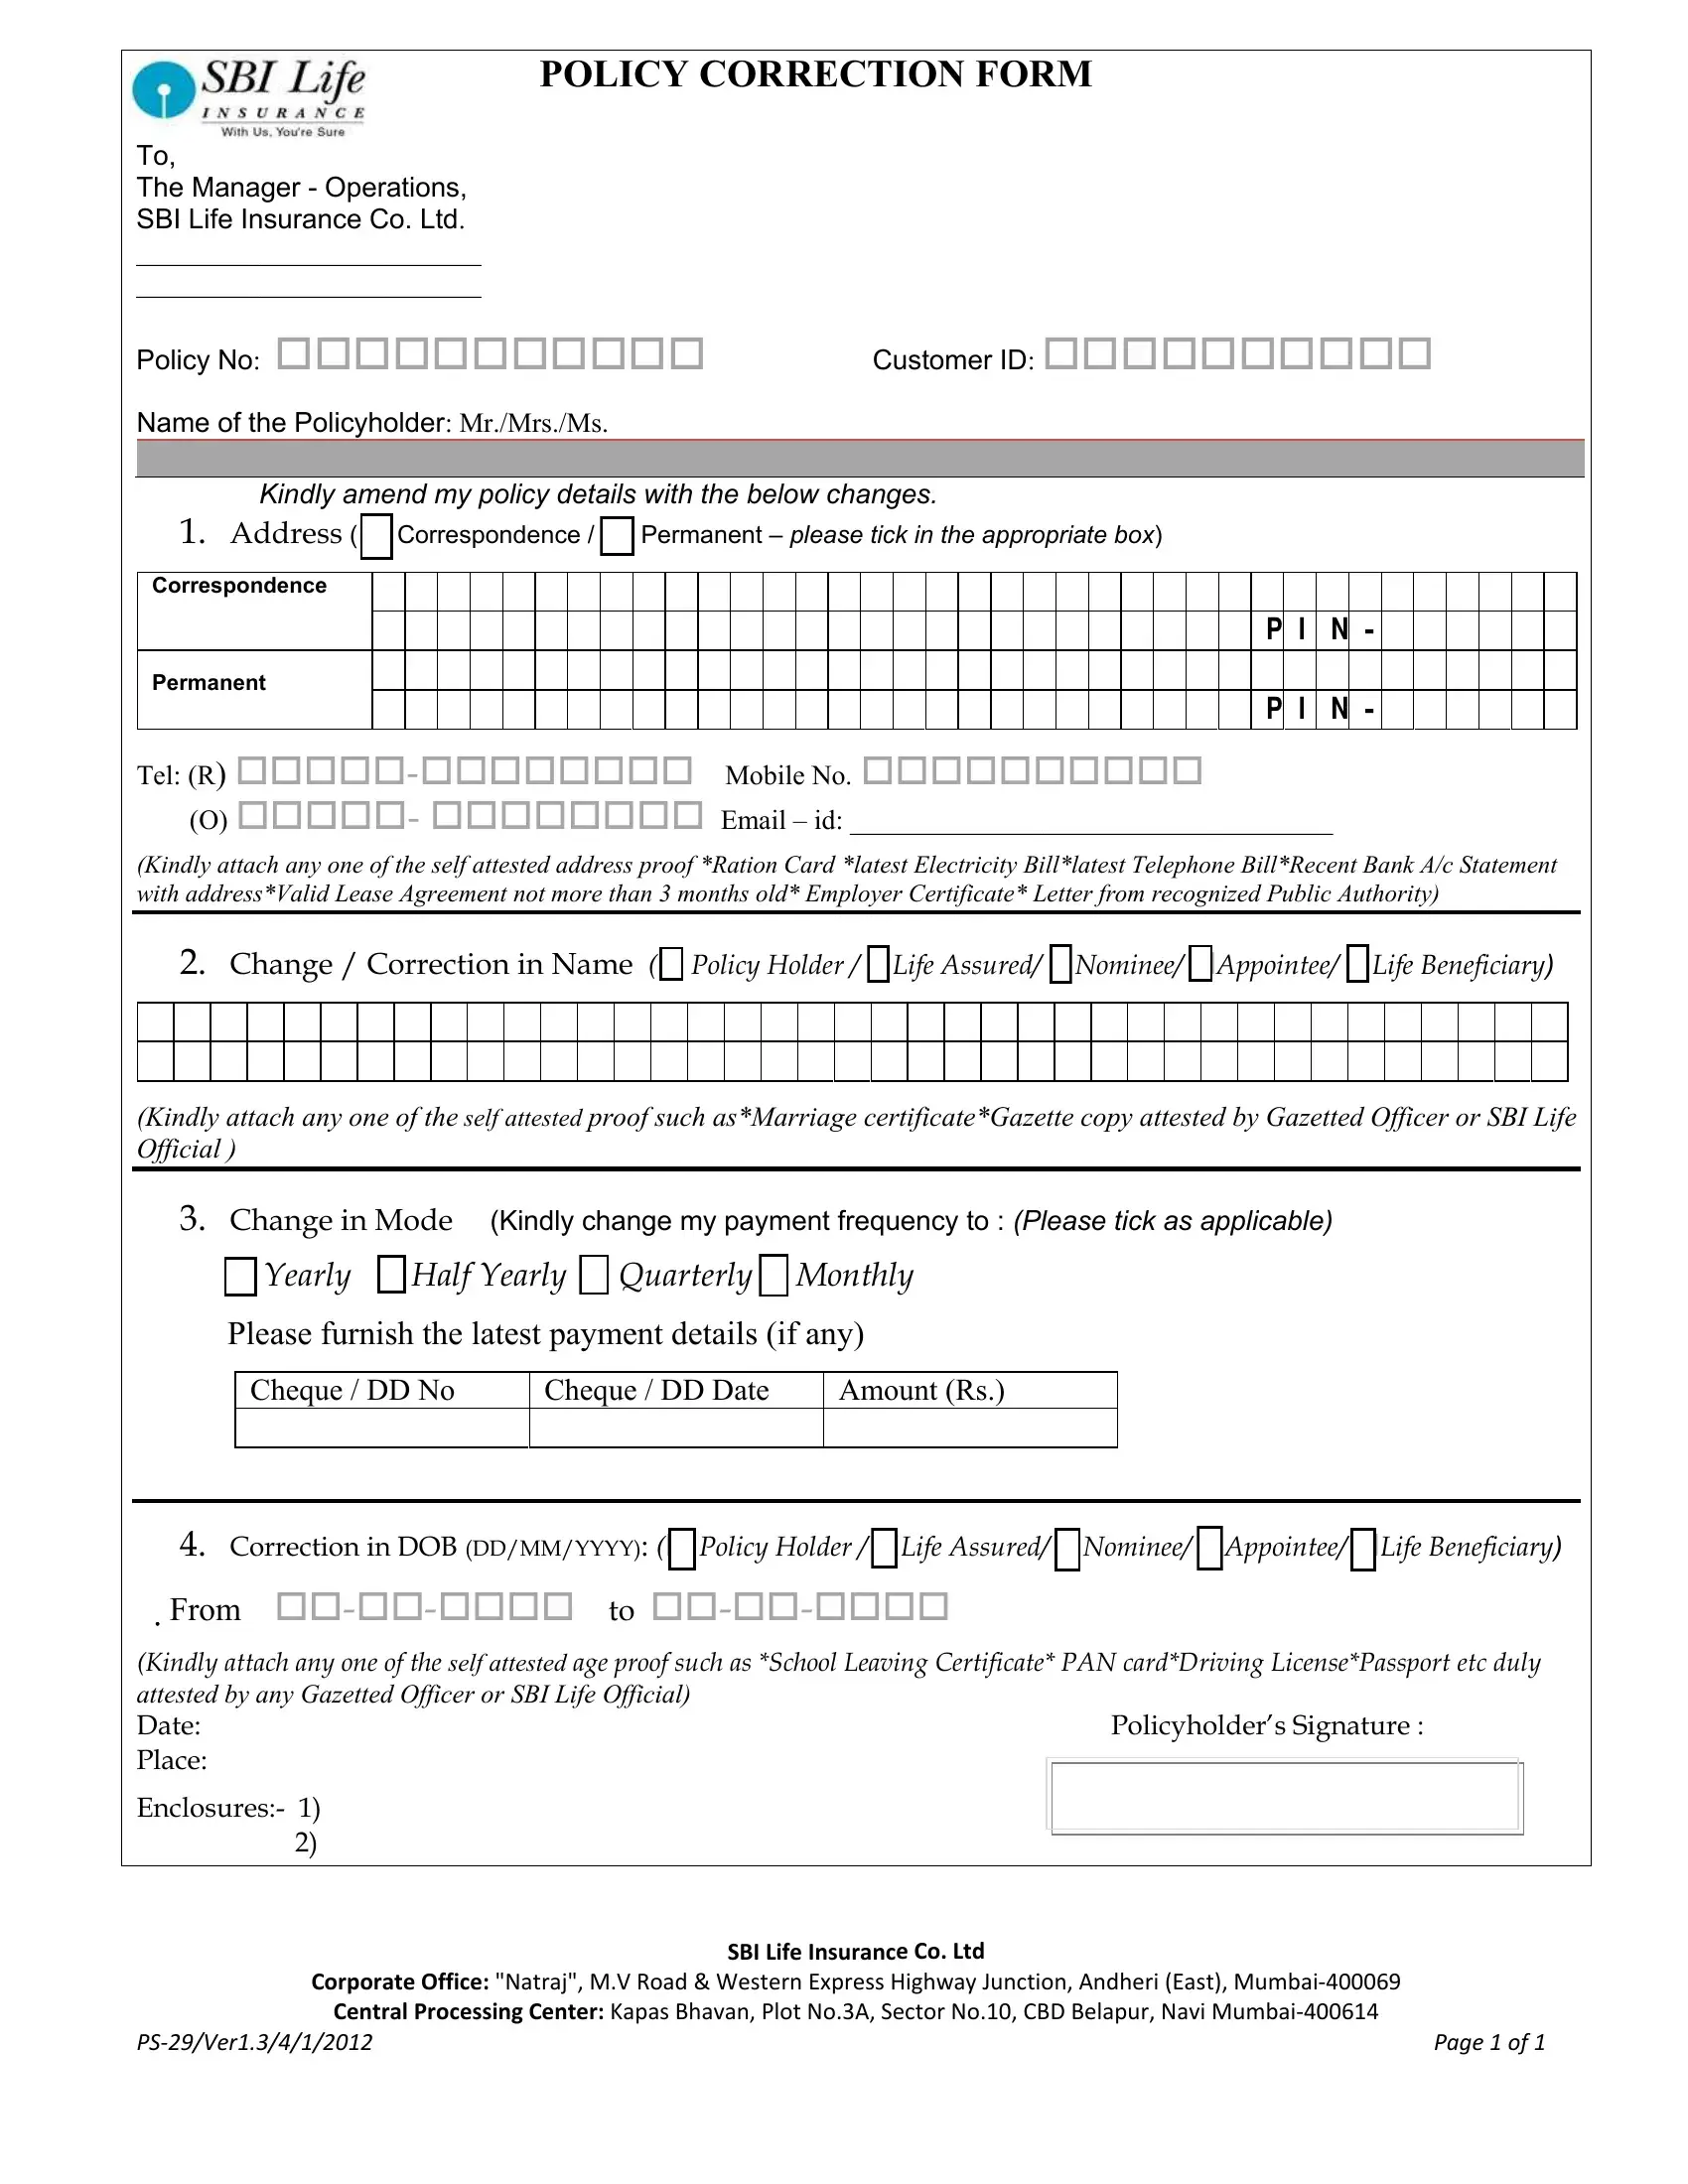 How to Fill Nid Card Correction Form 2  